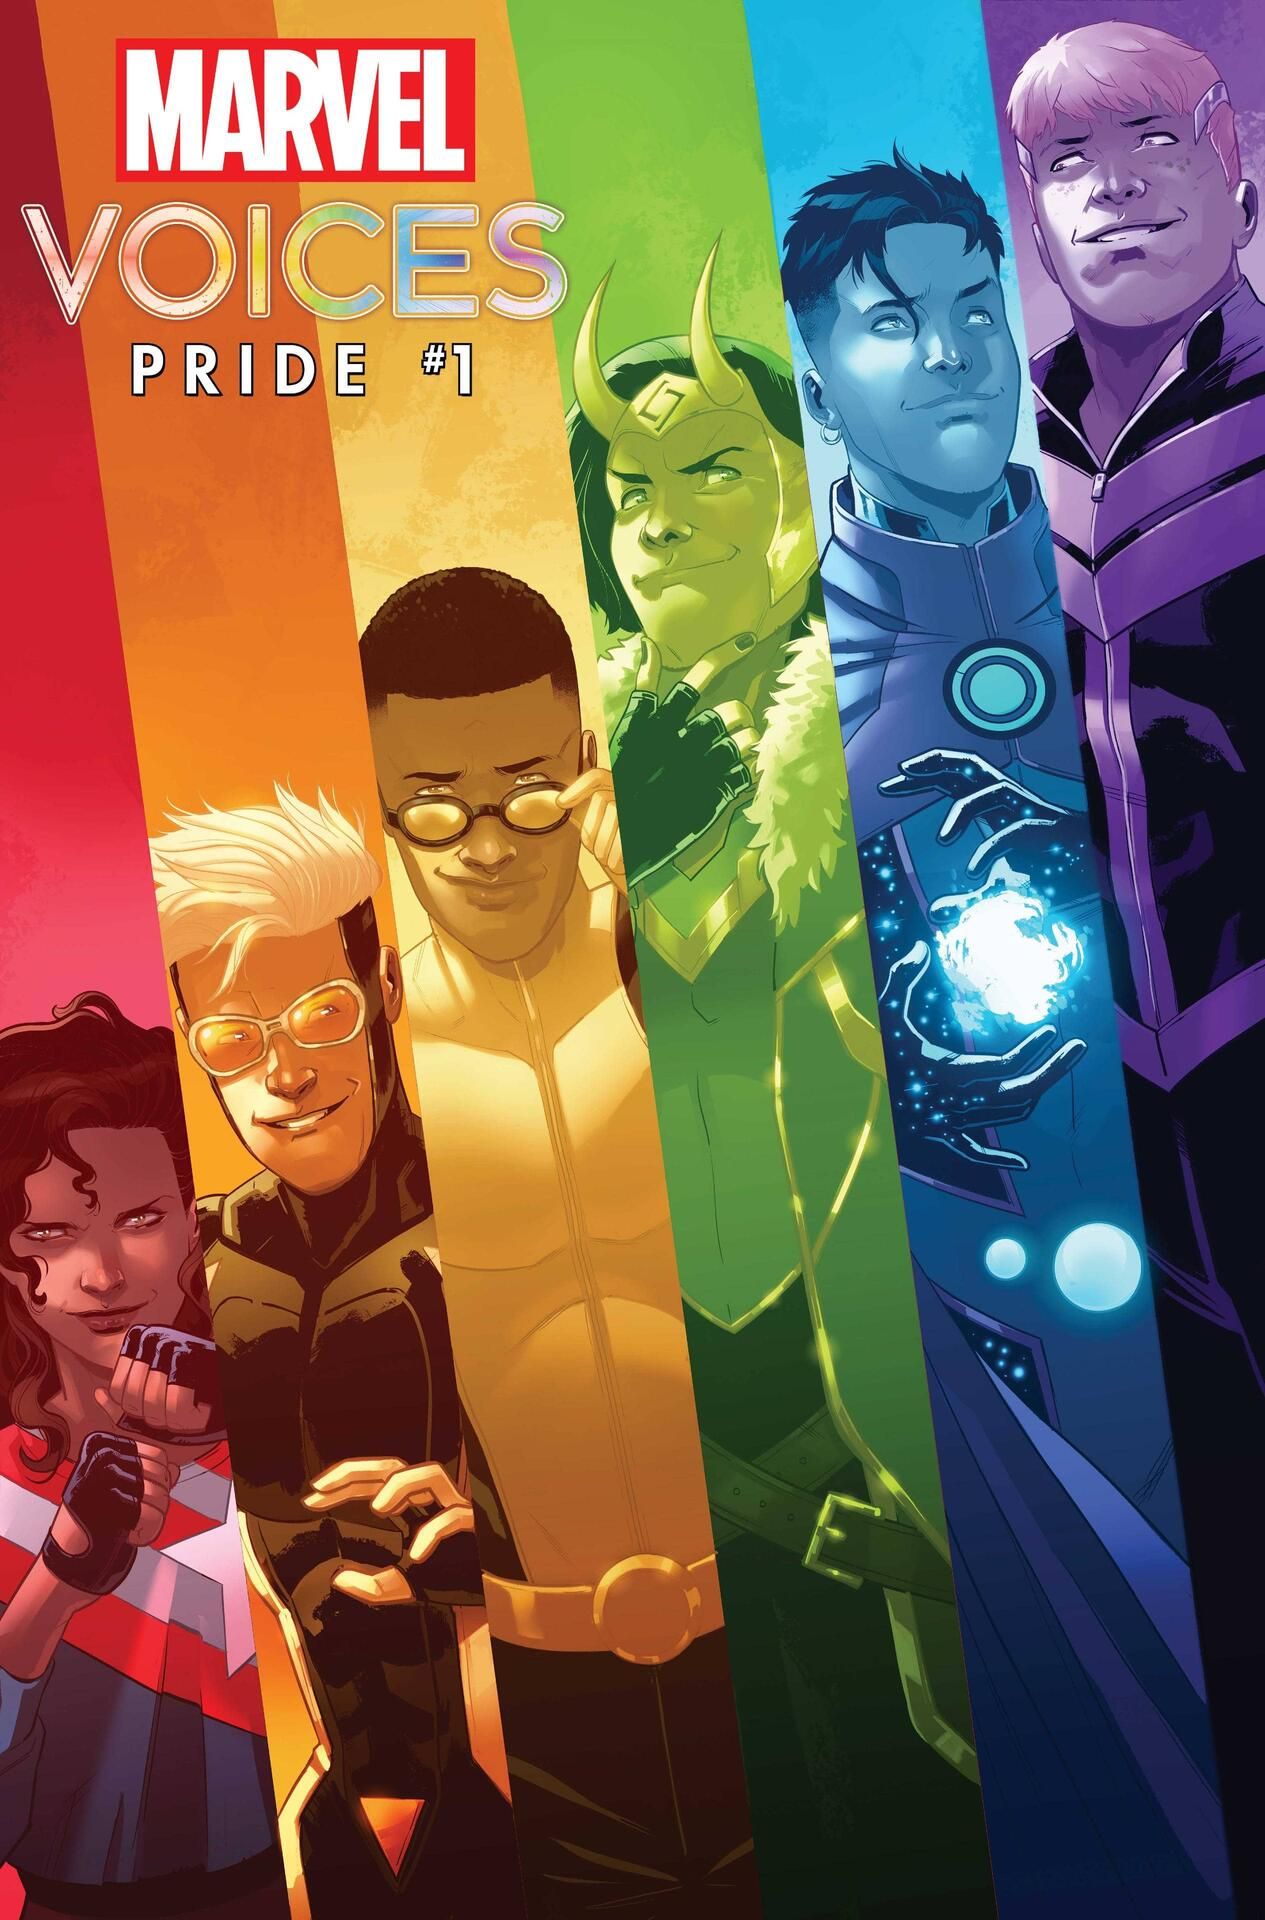 Young Avengers Return in Marvel Voice's PRIDE This June